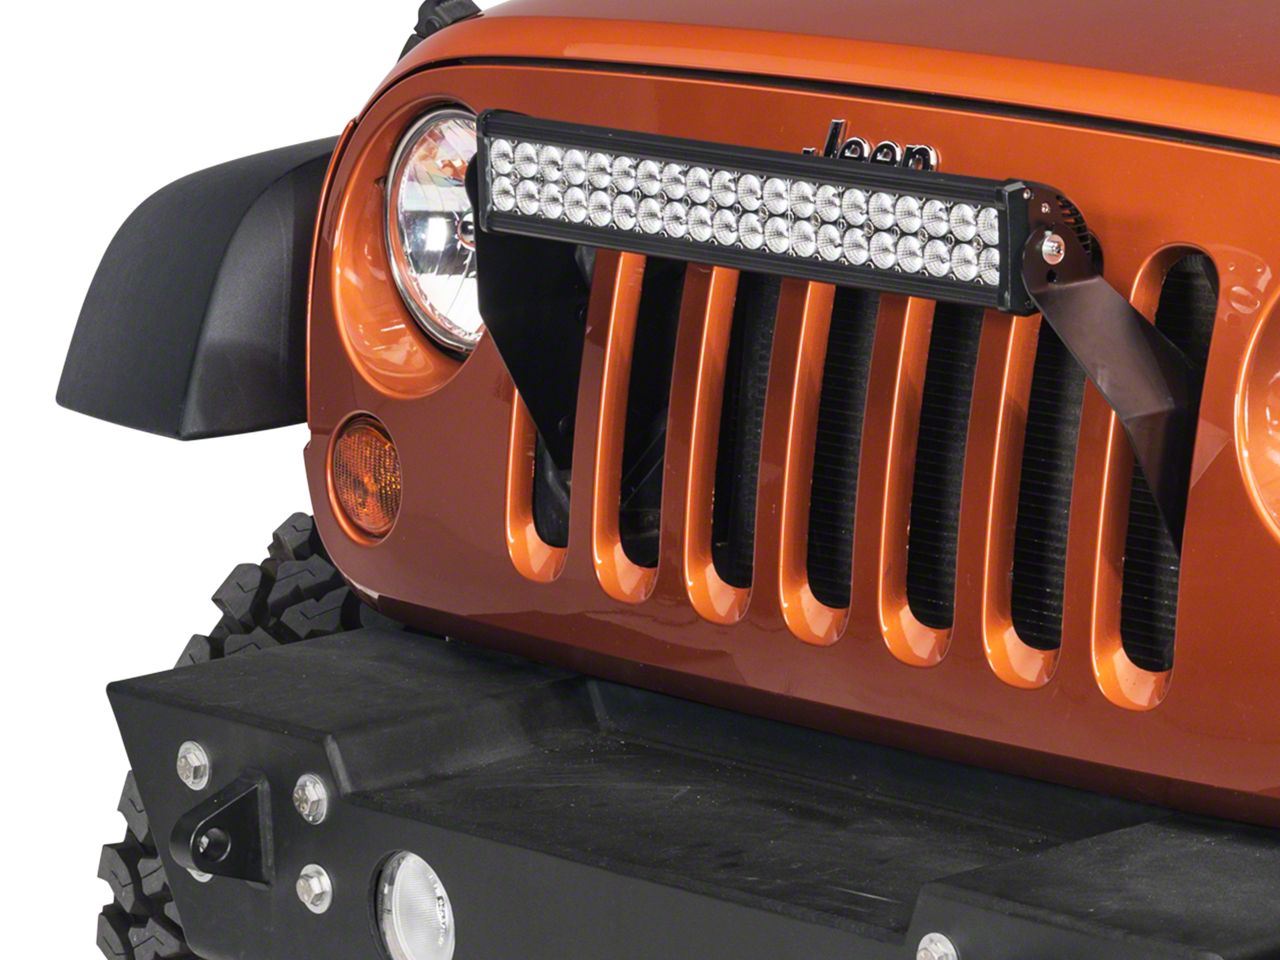 Wrangler Auxiliary & Off-Road Lighting